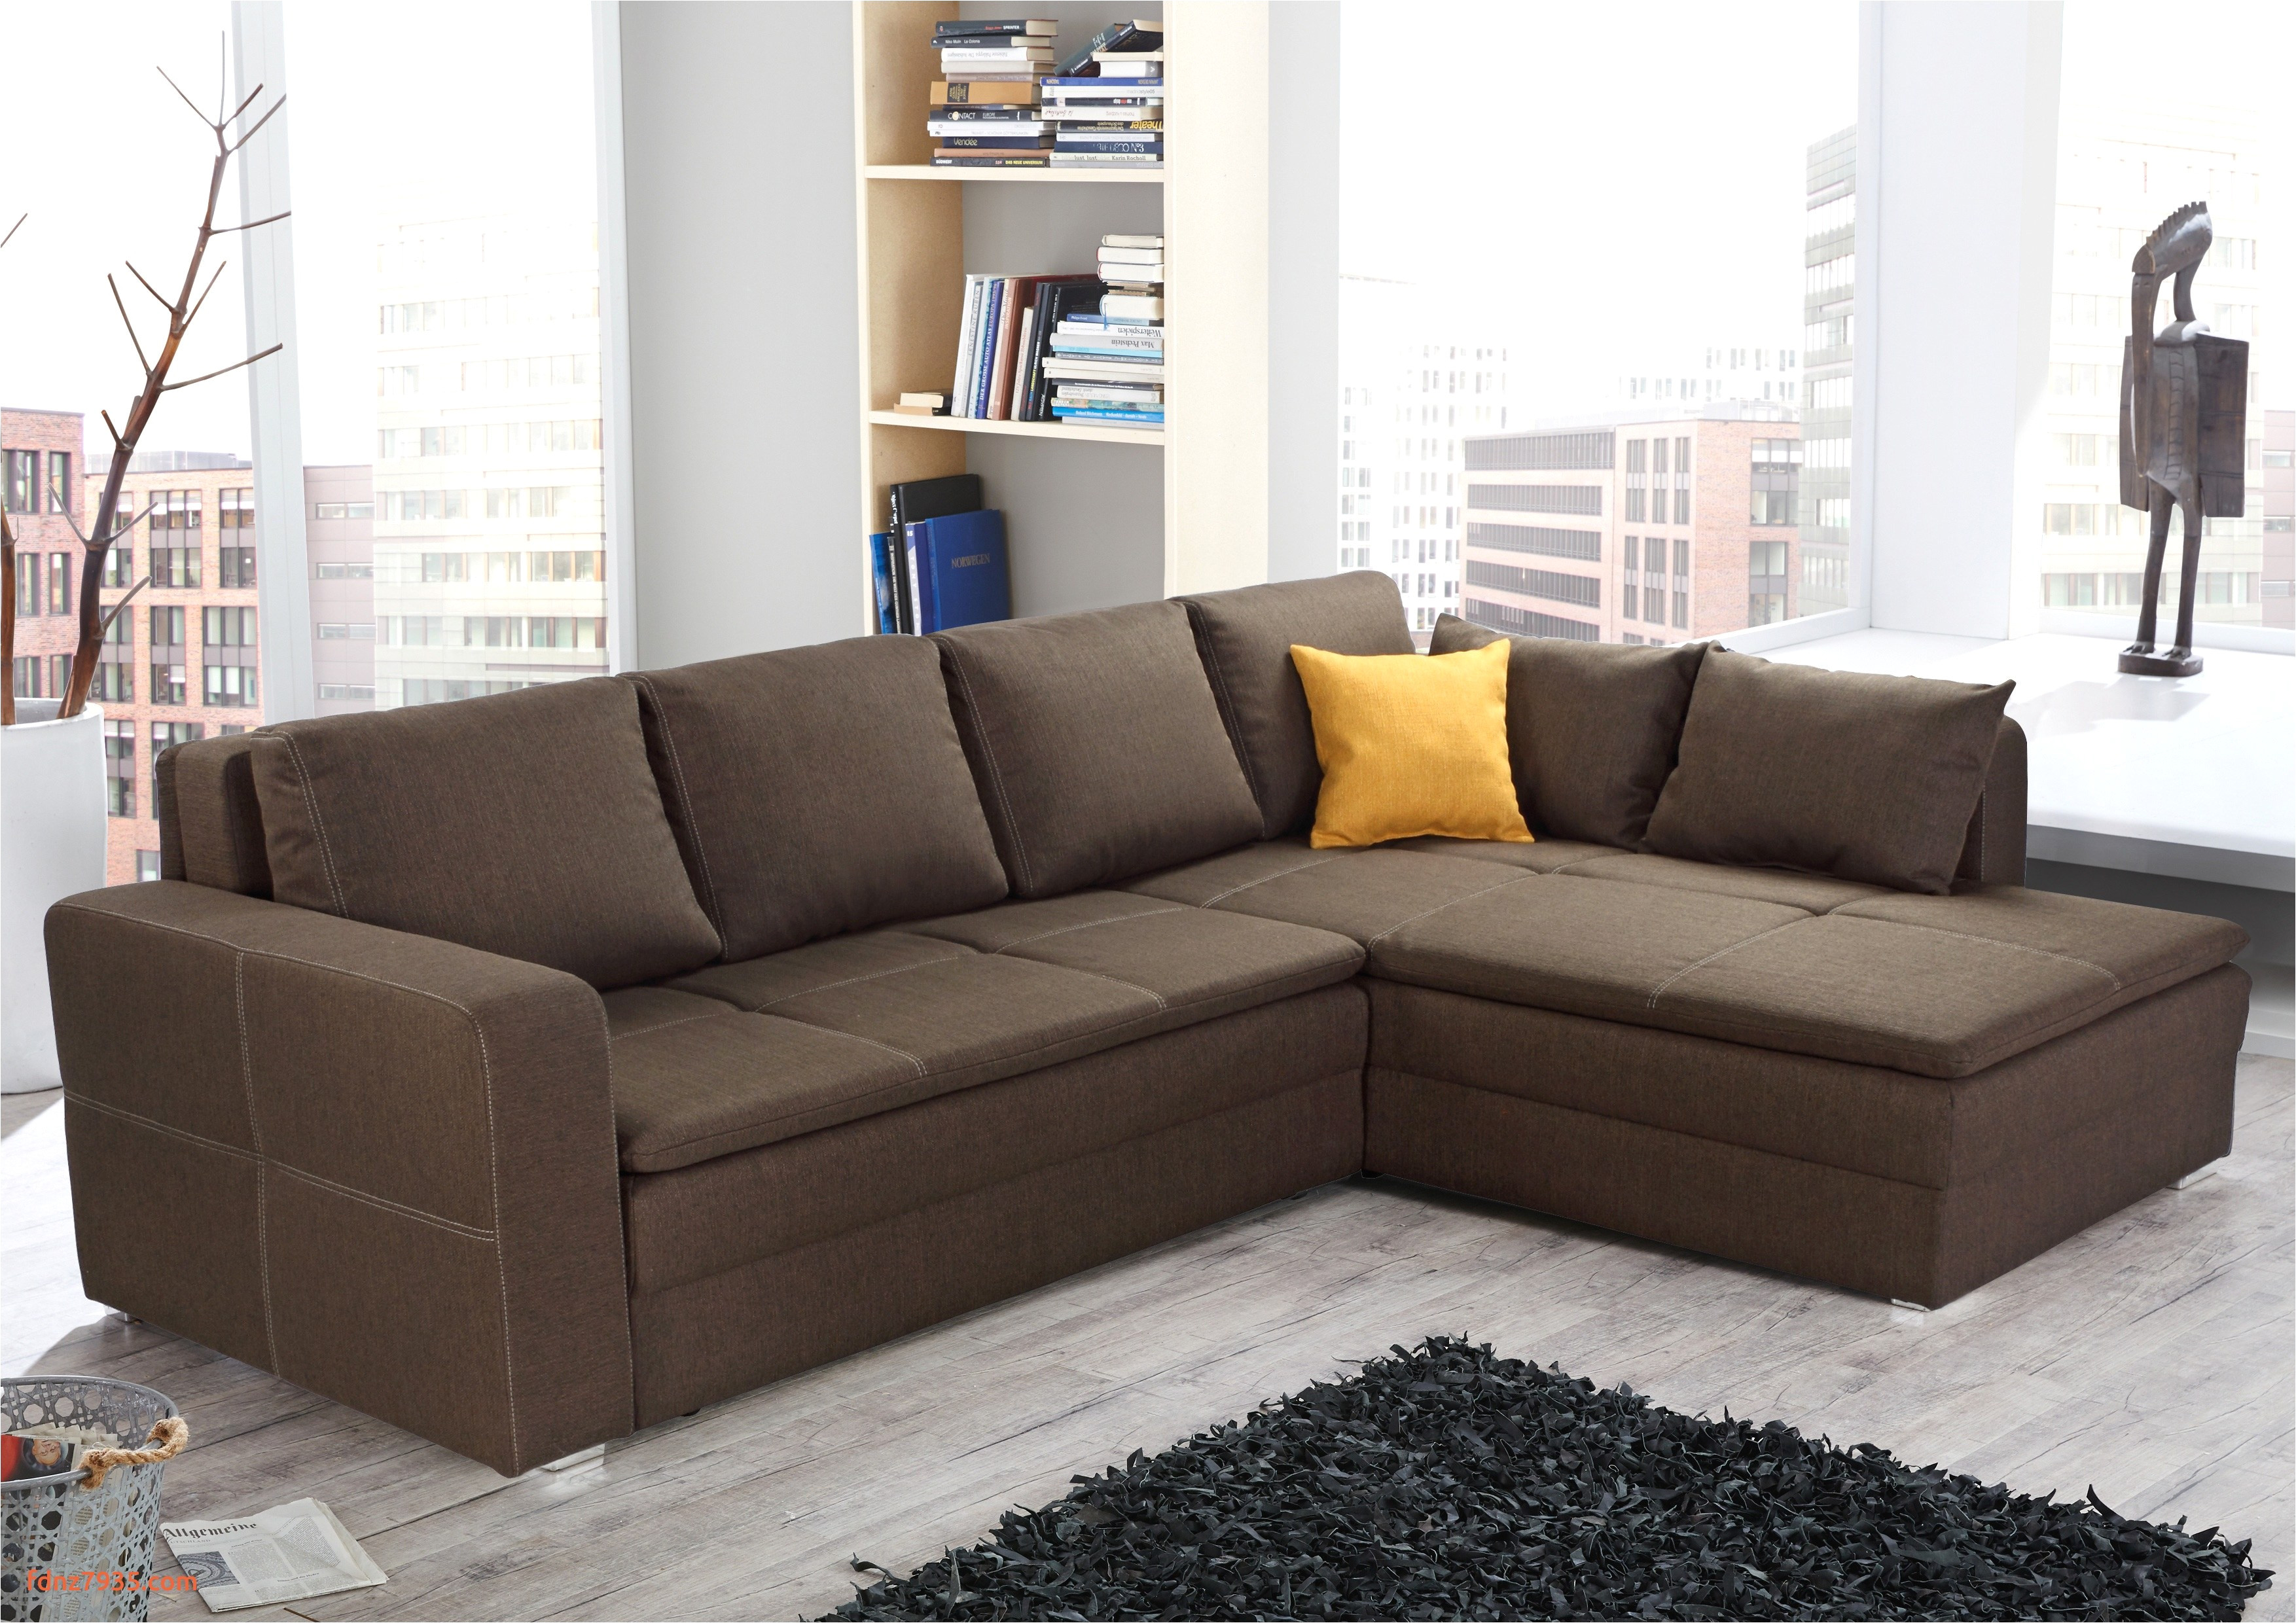 american freight sectional sofas sectional sofas okc fresh sofa design up to 1080p